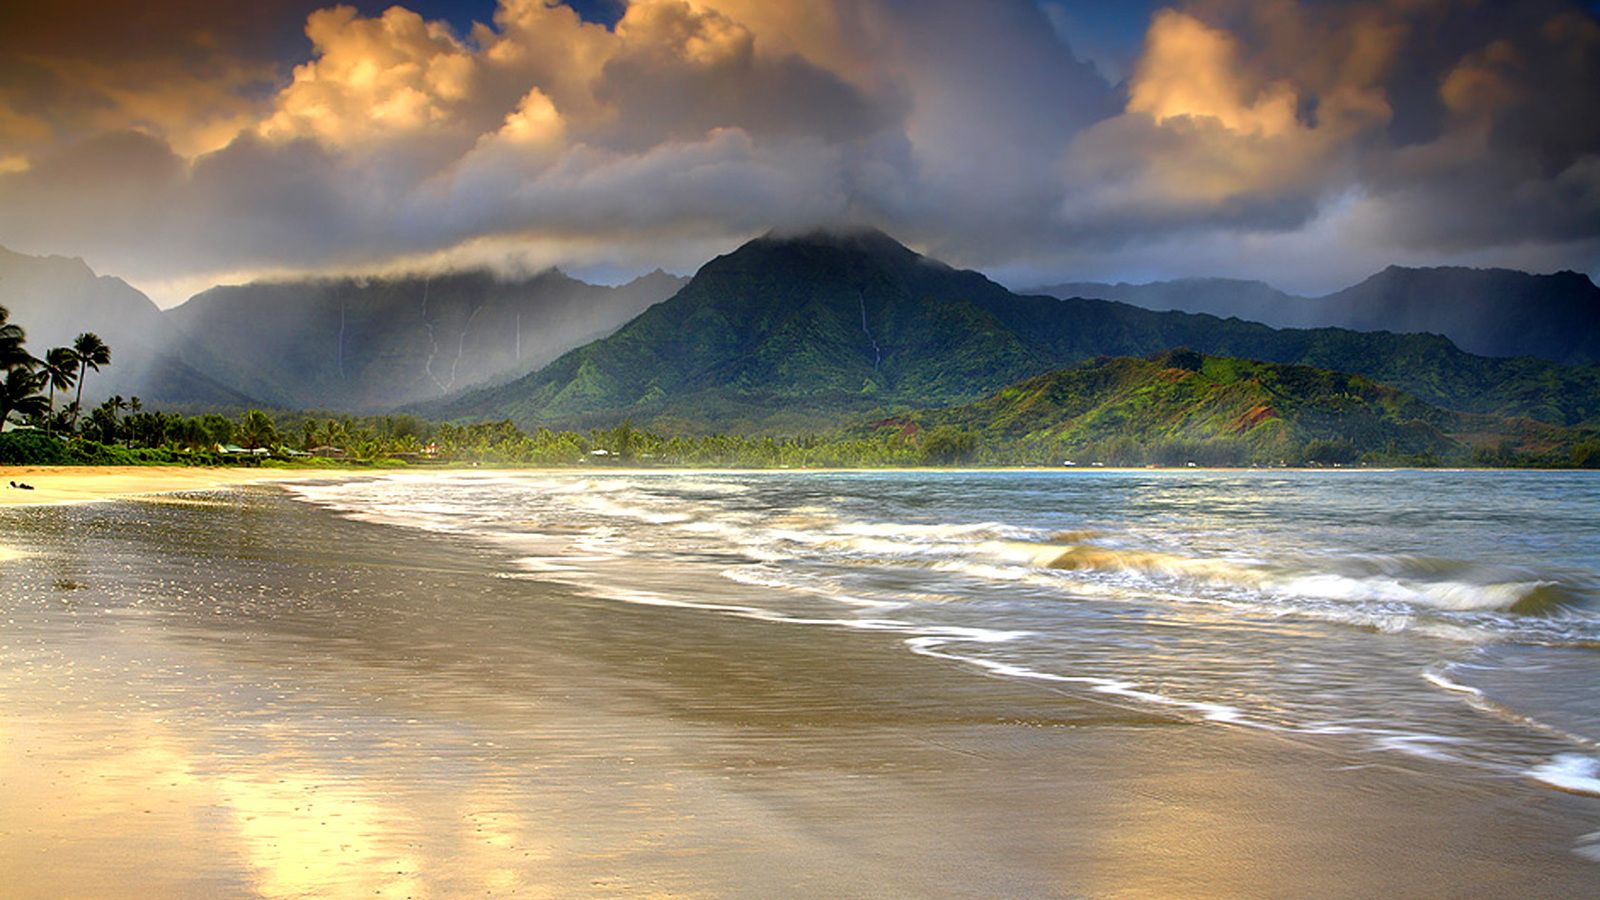 Mobile wallpaper: Beach, Hawaii, Nature, Ocean, Kauai, View From Above, 70068 download the picture for free